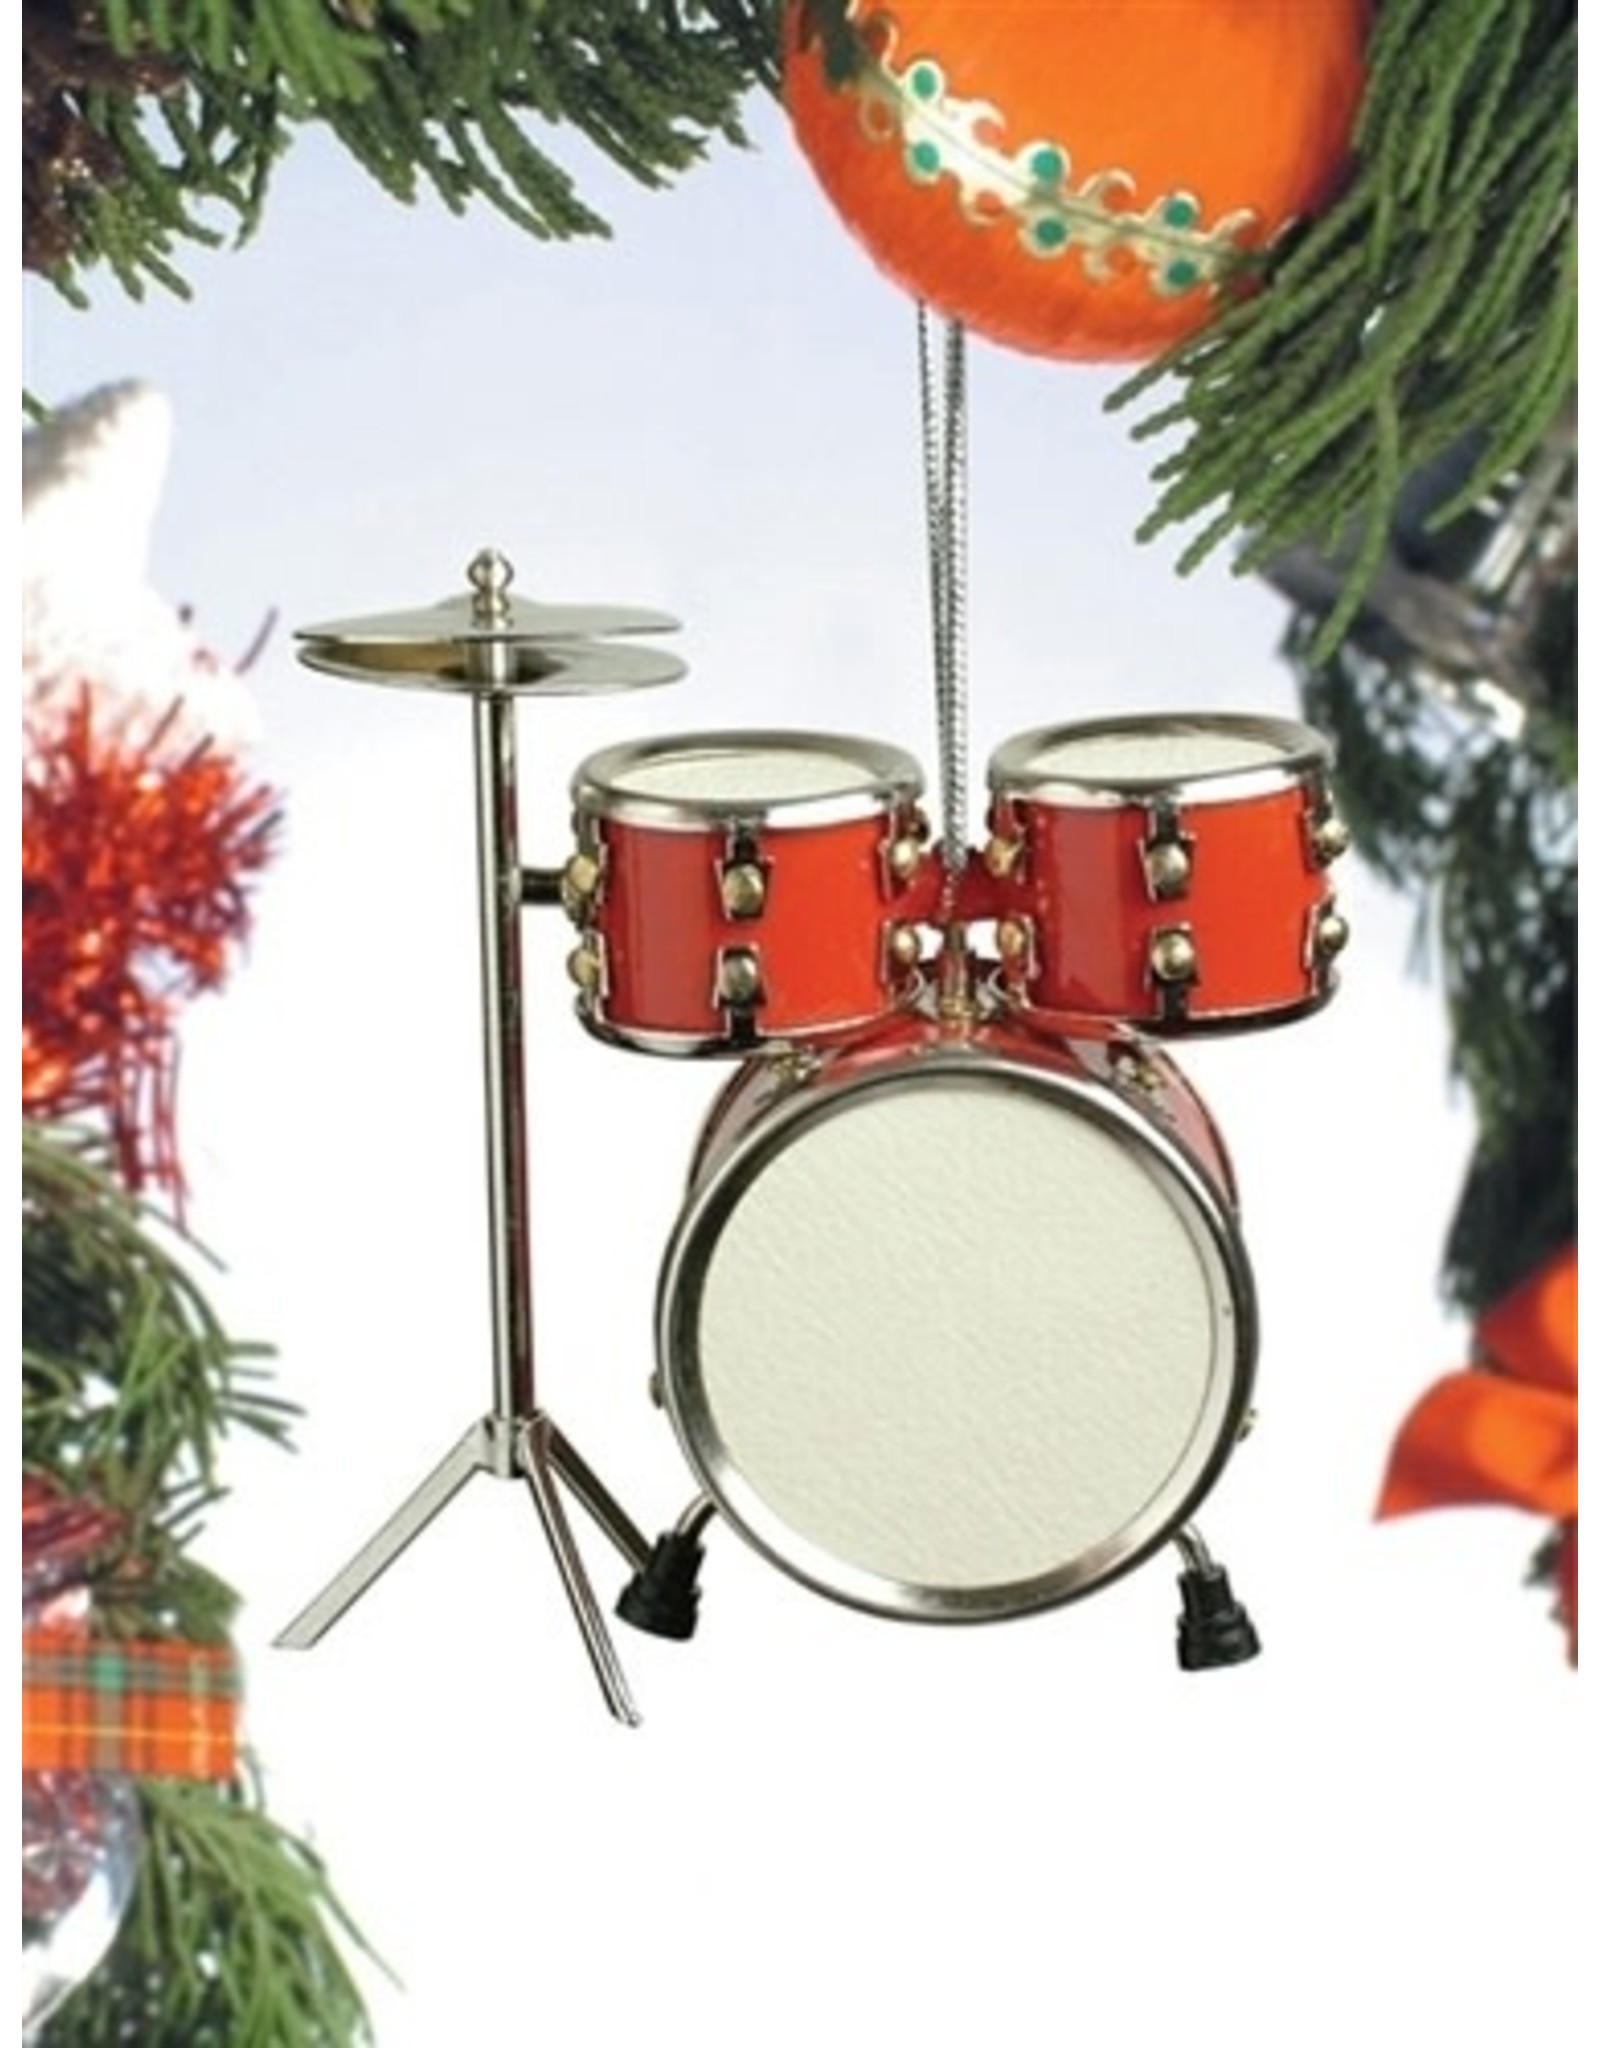 Broadway Gift Co Red Drum Set